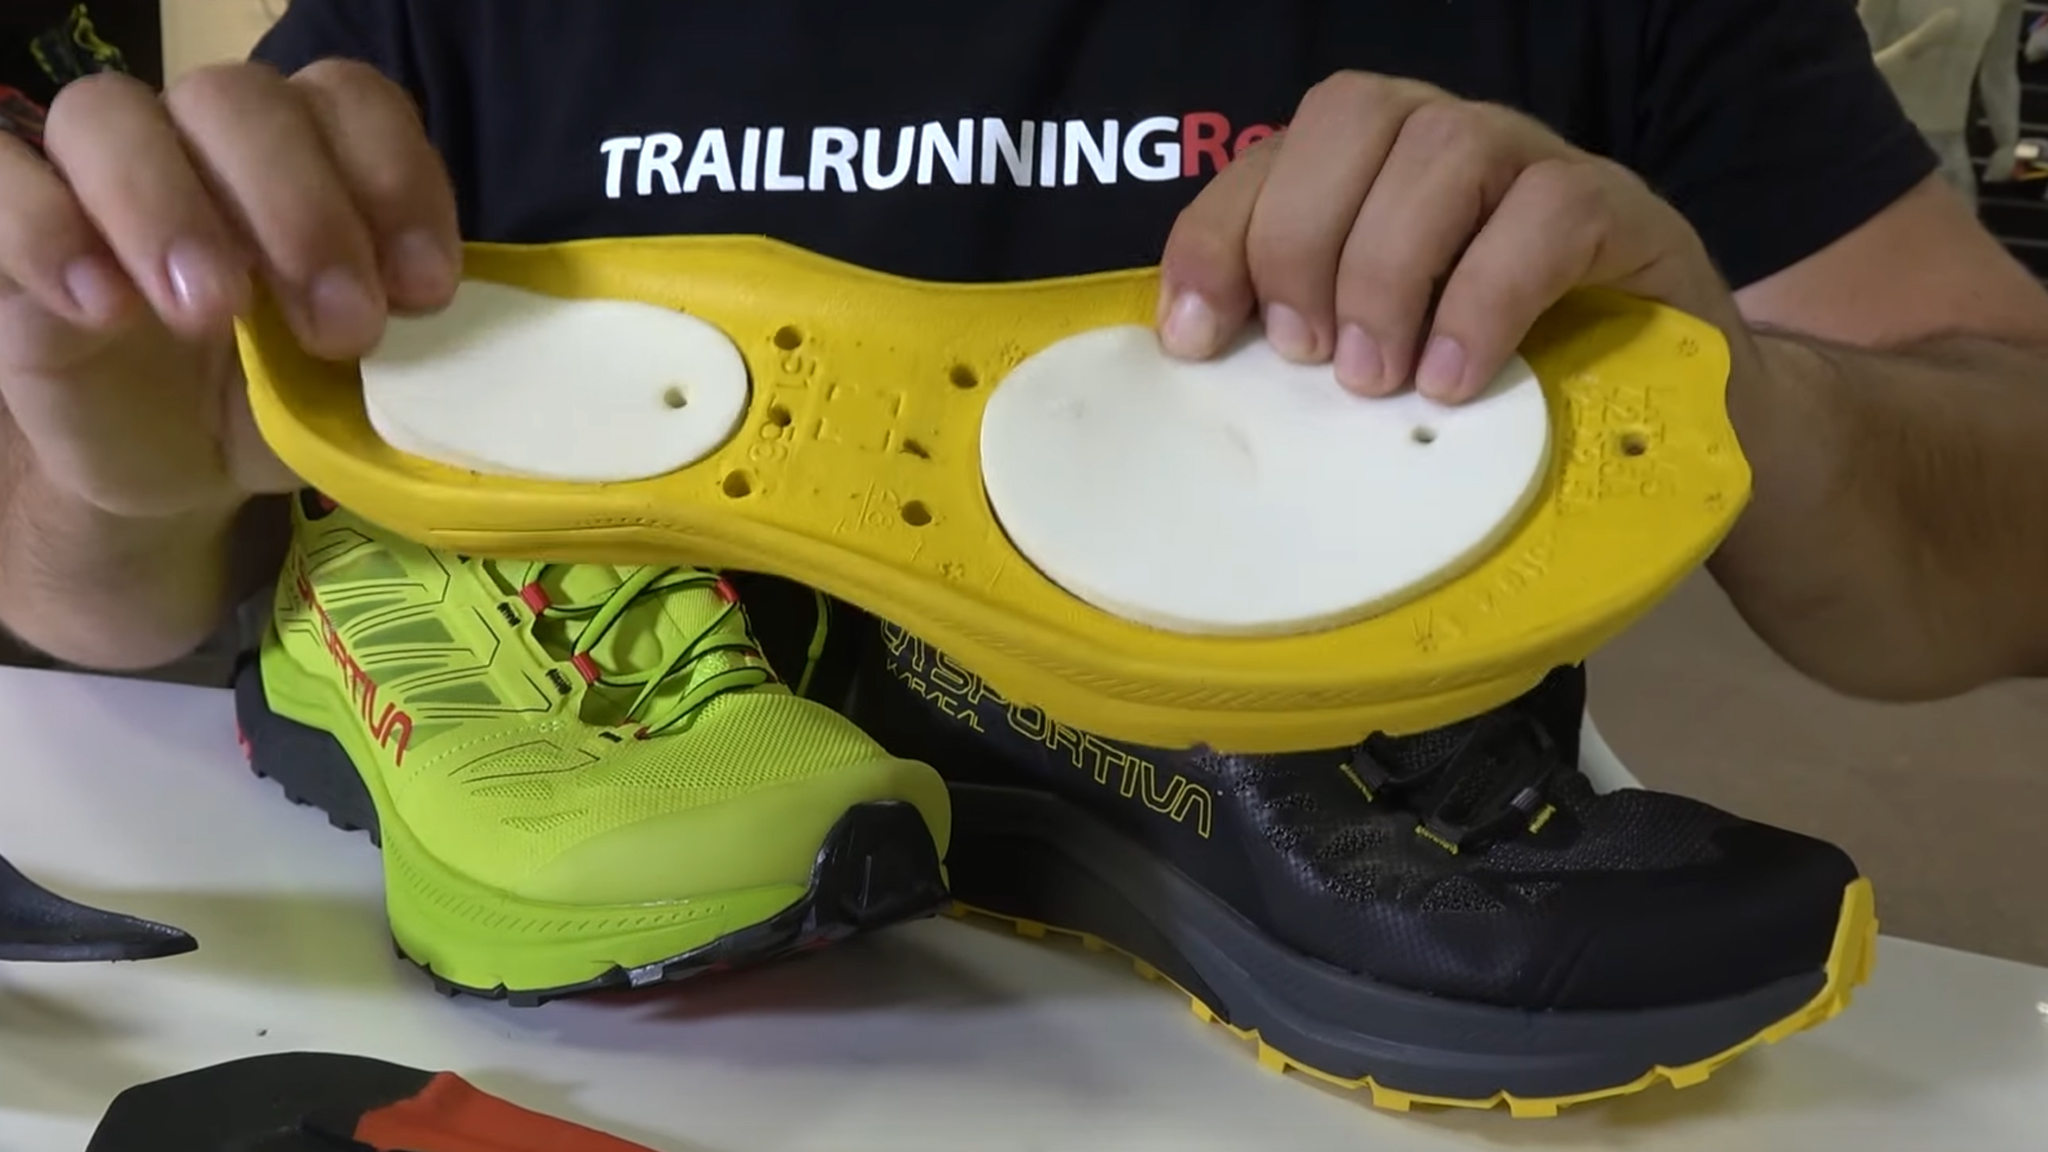 Actual components of the La Sportiva Jackal II courtesy of trailrunningreview.com